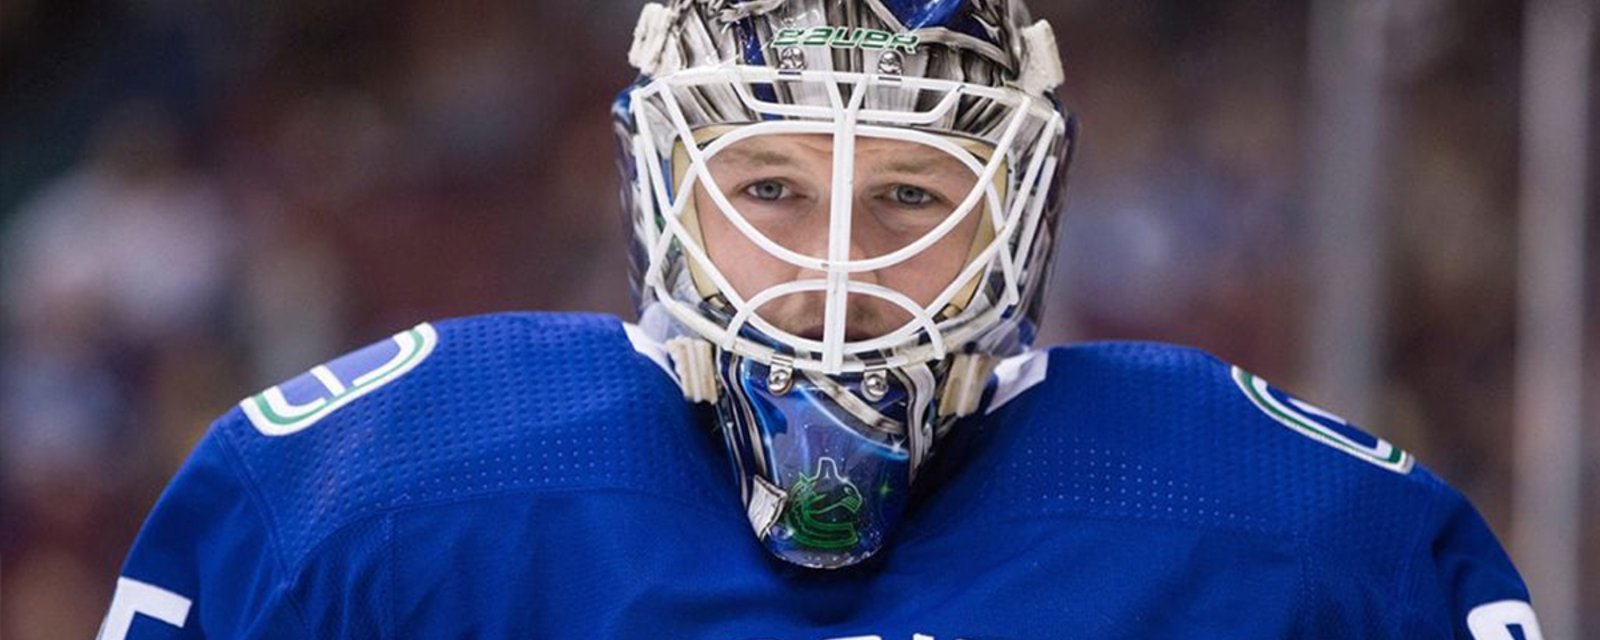 Rumor: Demko to start in front of friends and family?